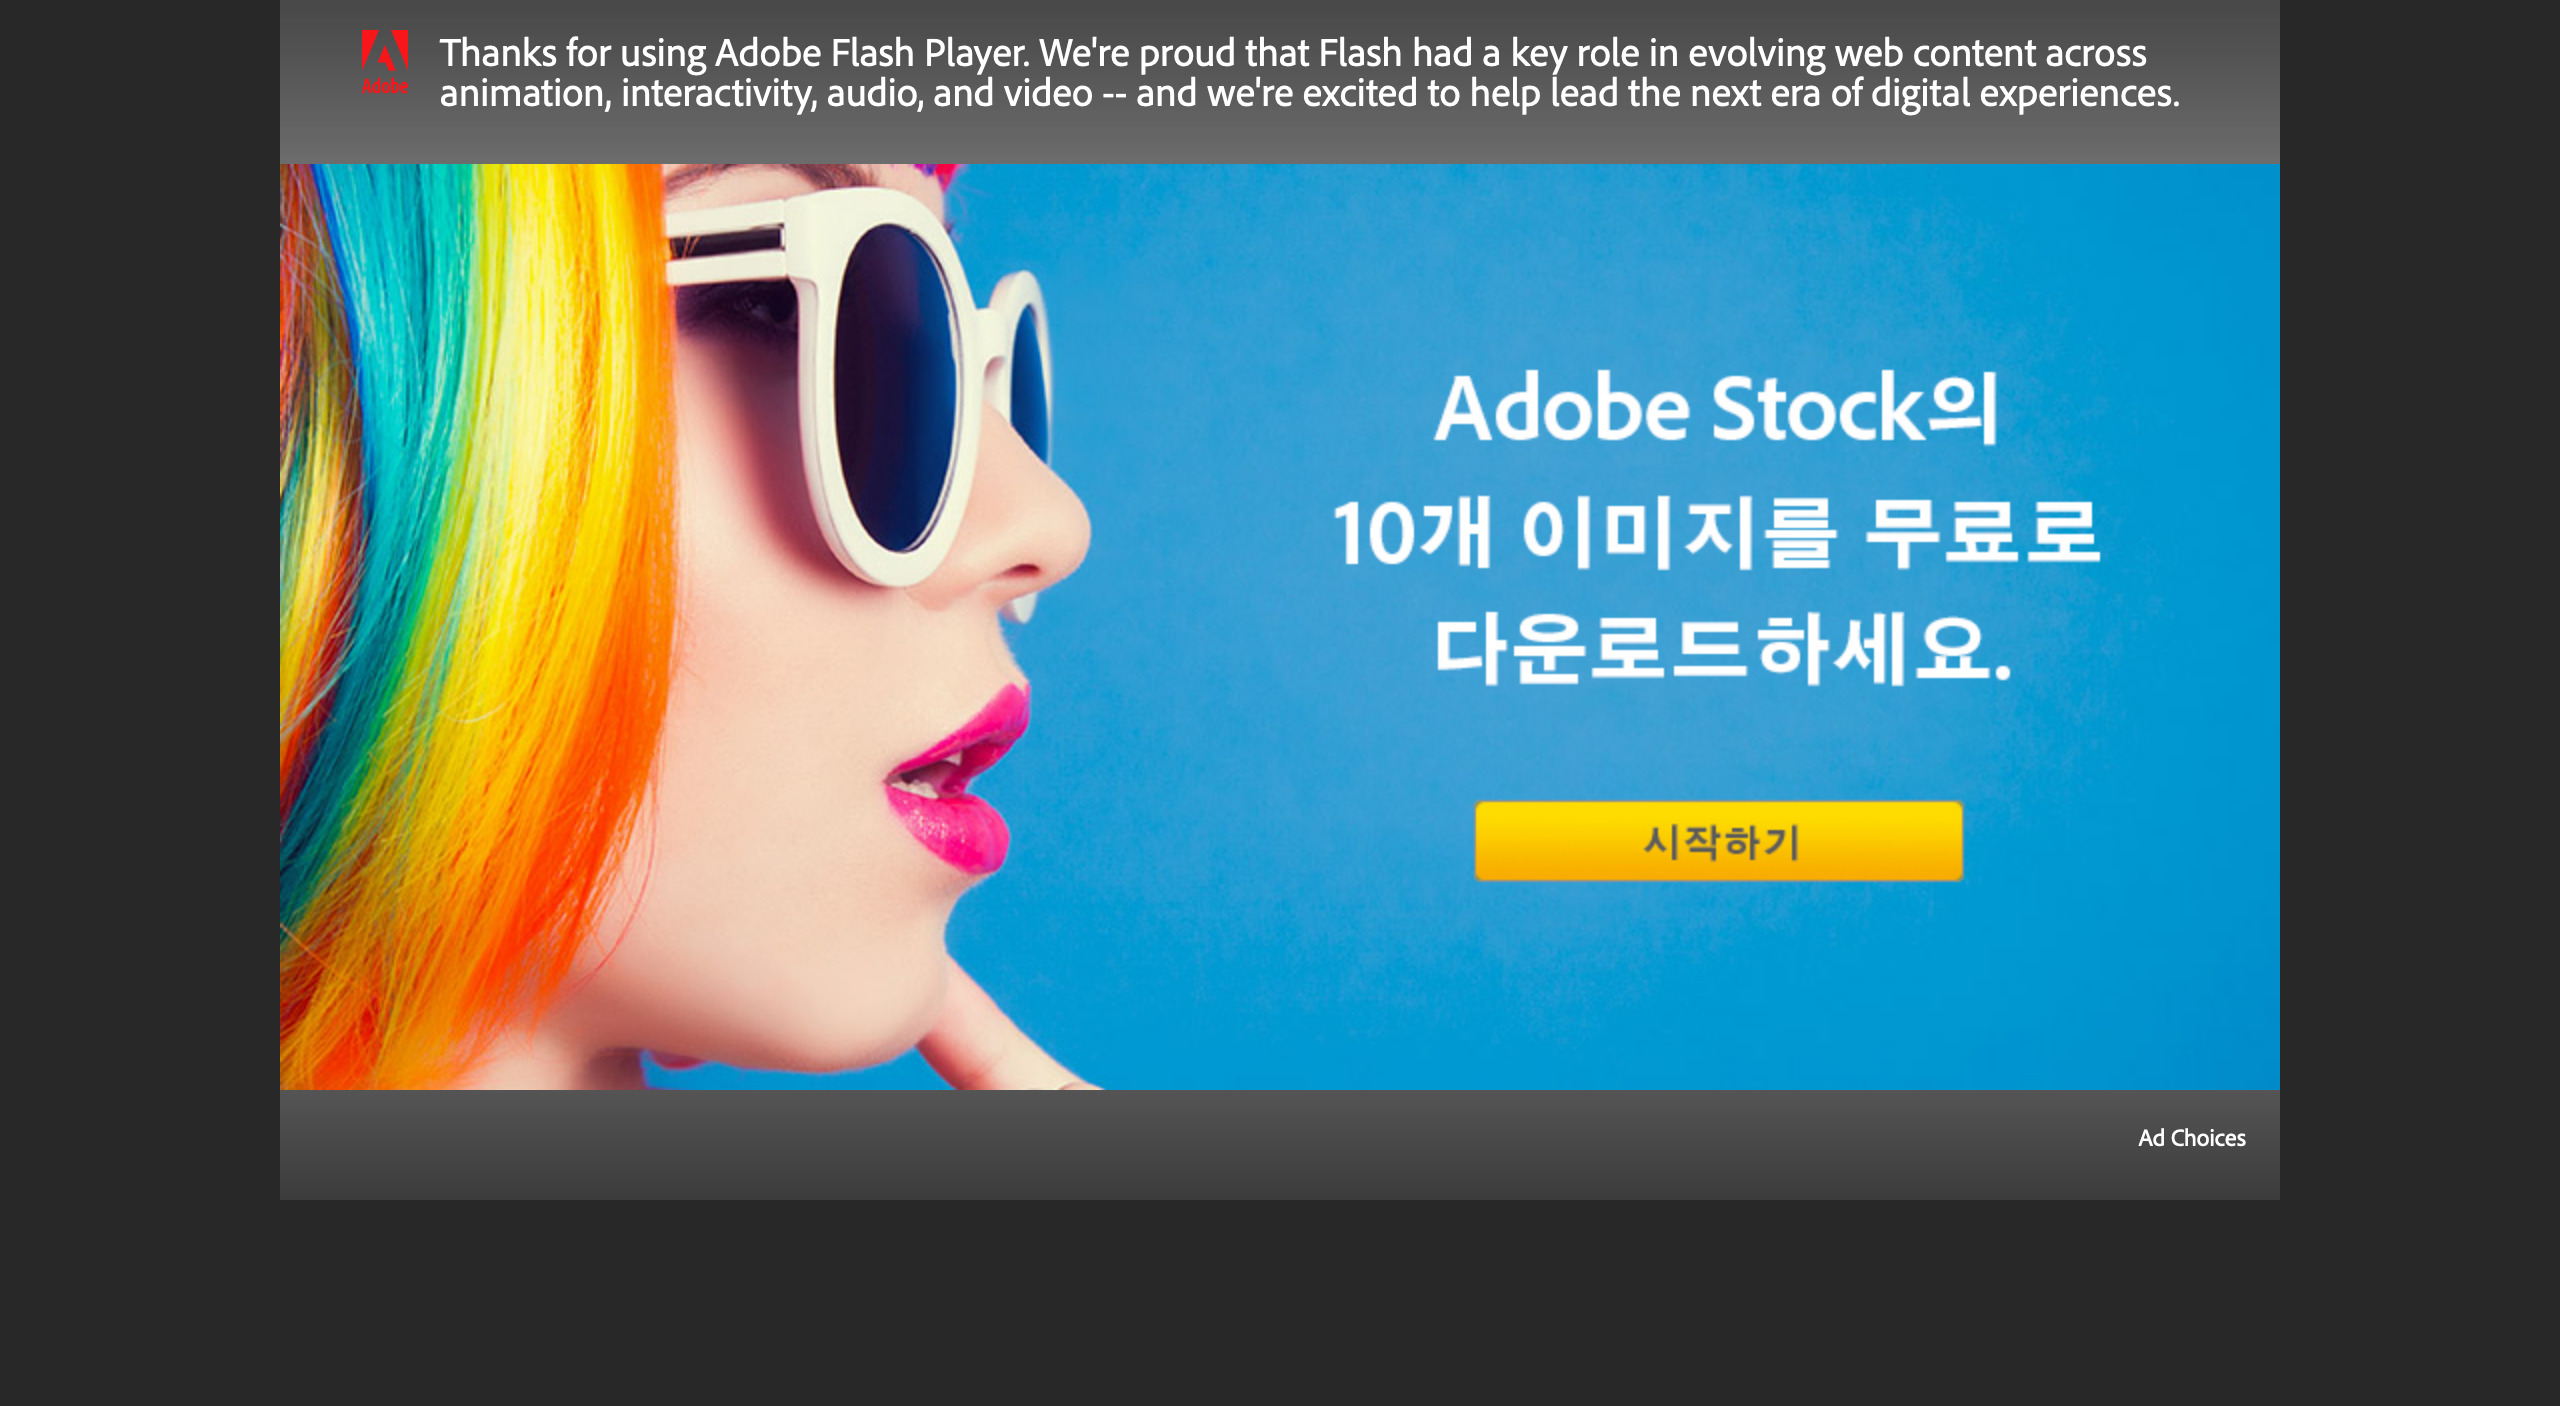 Adobe 광고 - Thanks for using Adobe Flash Player. We're proud that Flash had a key role in evolving web content across animation, interactivity, audio, and video -- and we're excited to help lead the next era of digital experiences.